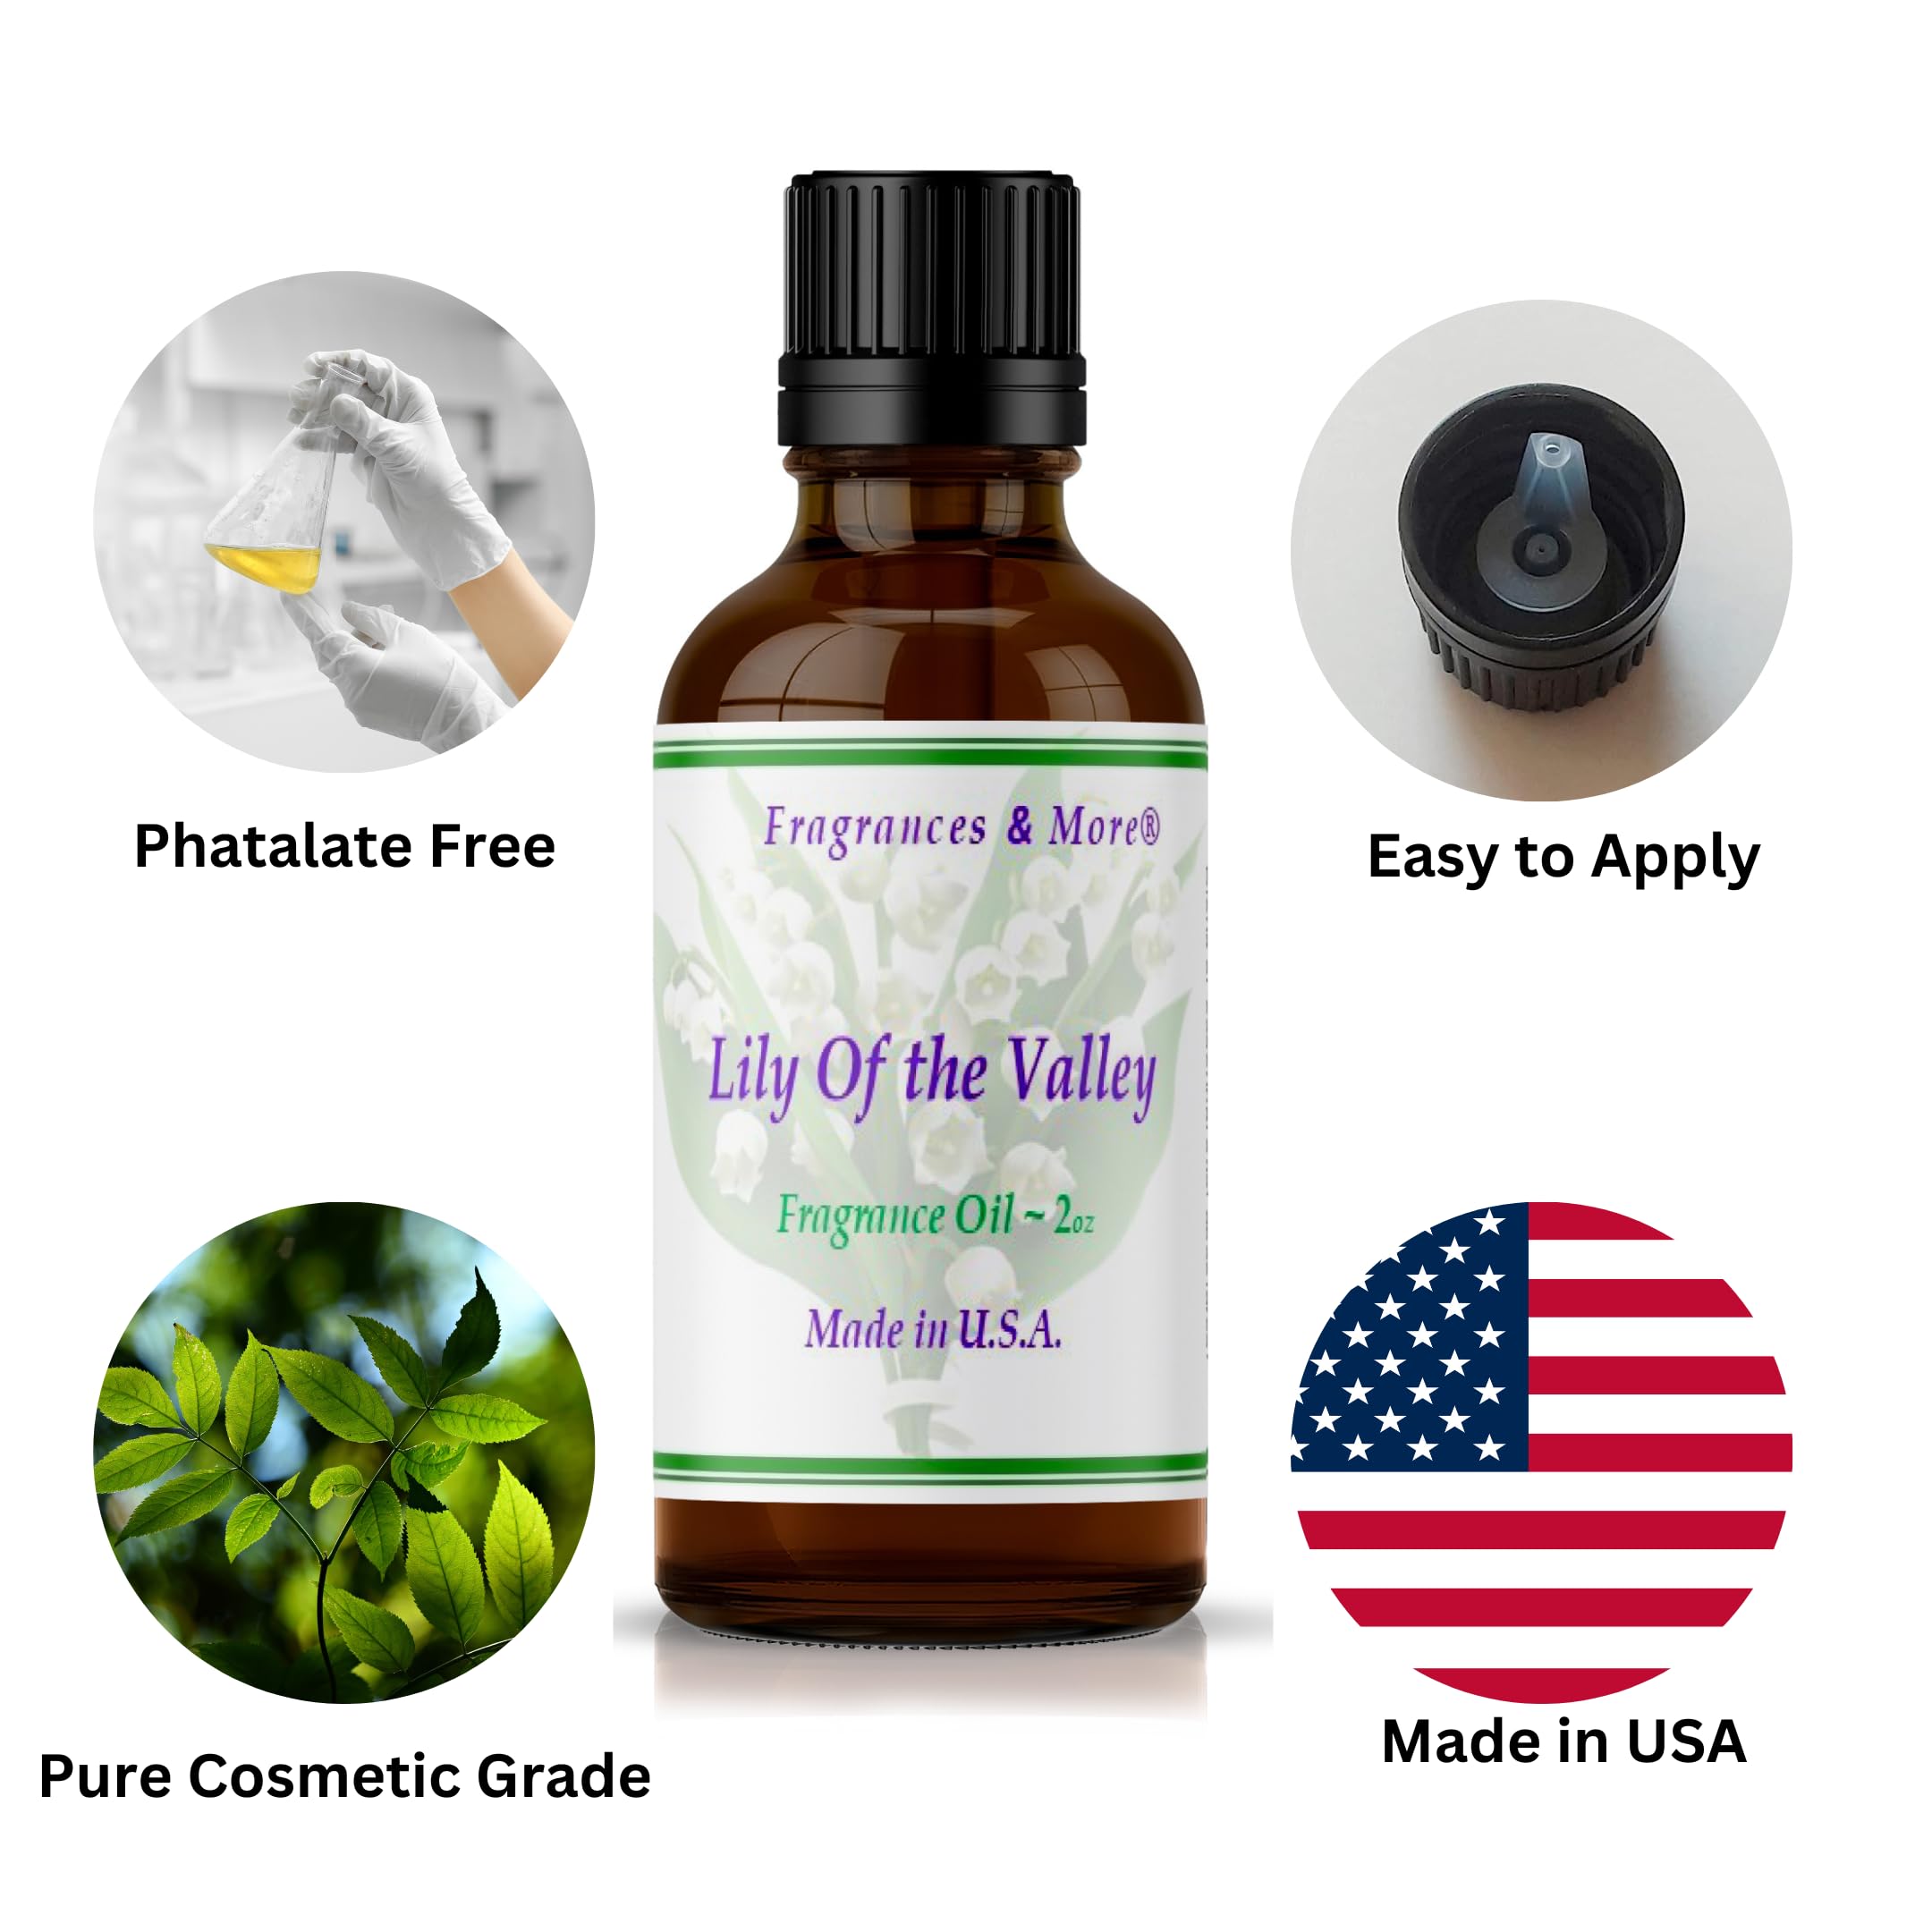 Fragrances & More - Lily of The Valley Fragrance Oil 2 oz. (60ml) Candle Scent for Candle Making. Scented Oil for Home Diffusers. Essential Oils for Soap Making. Home diffusers Refills.